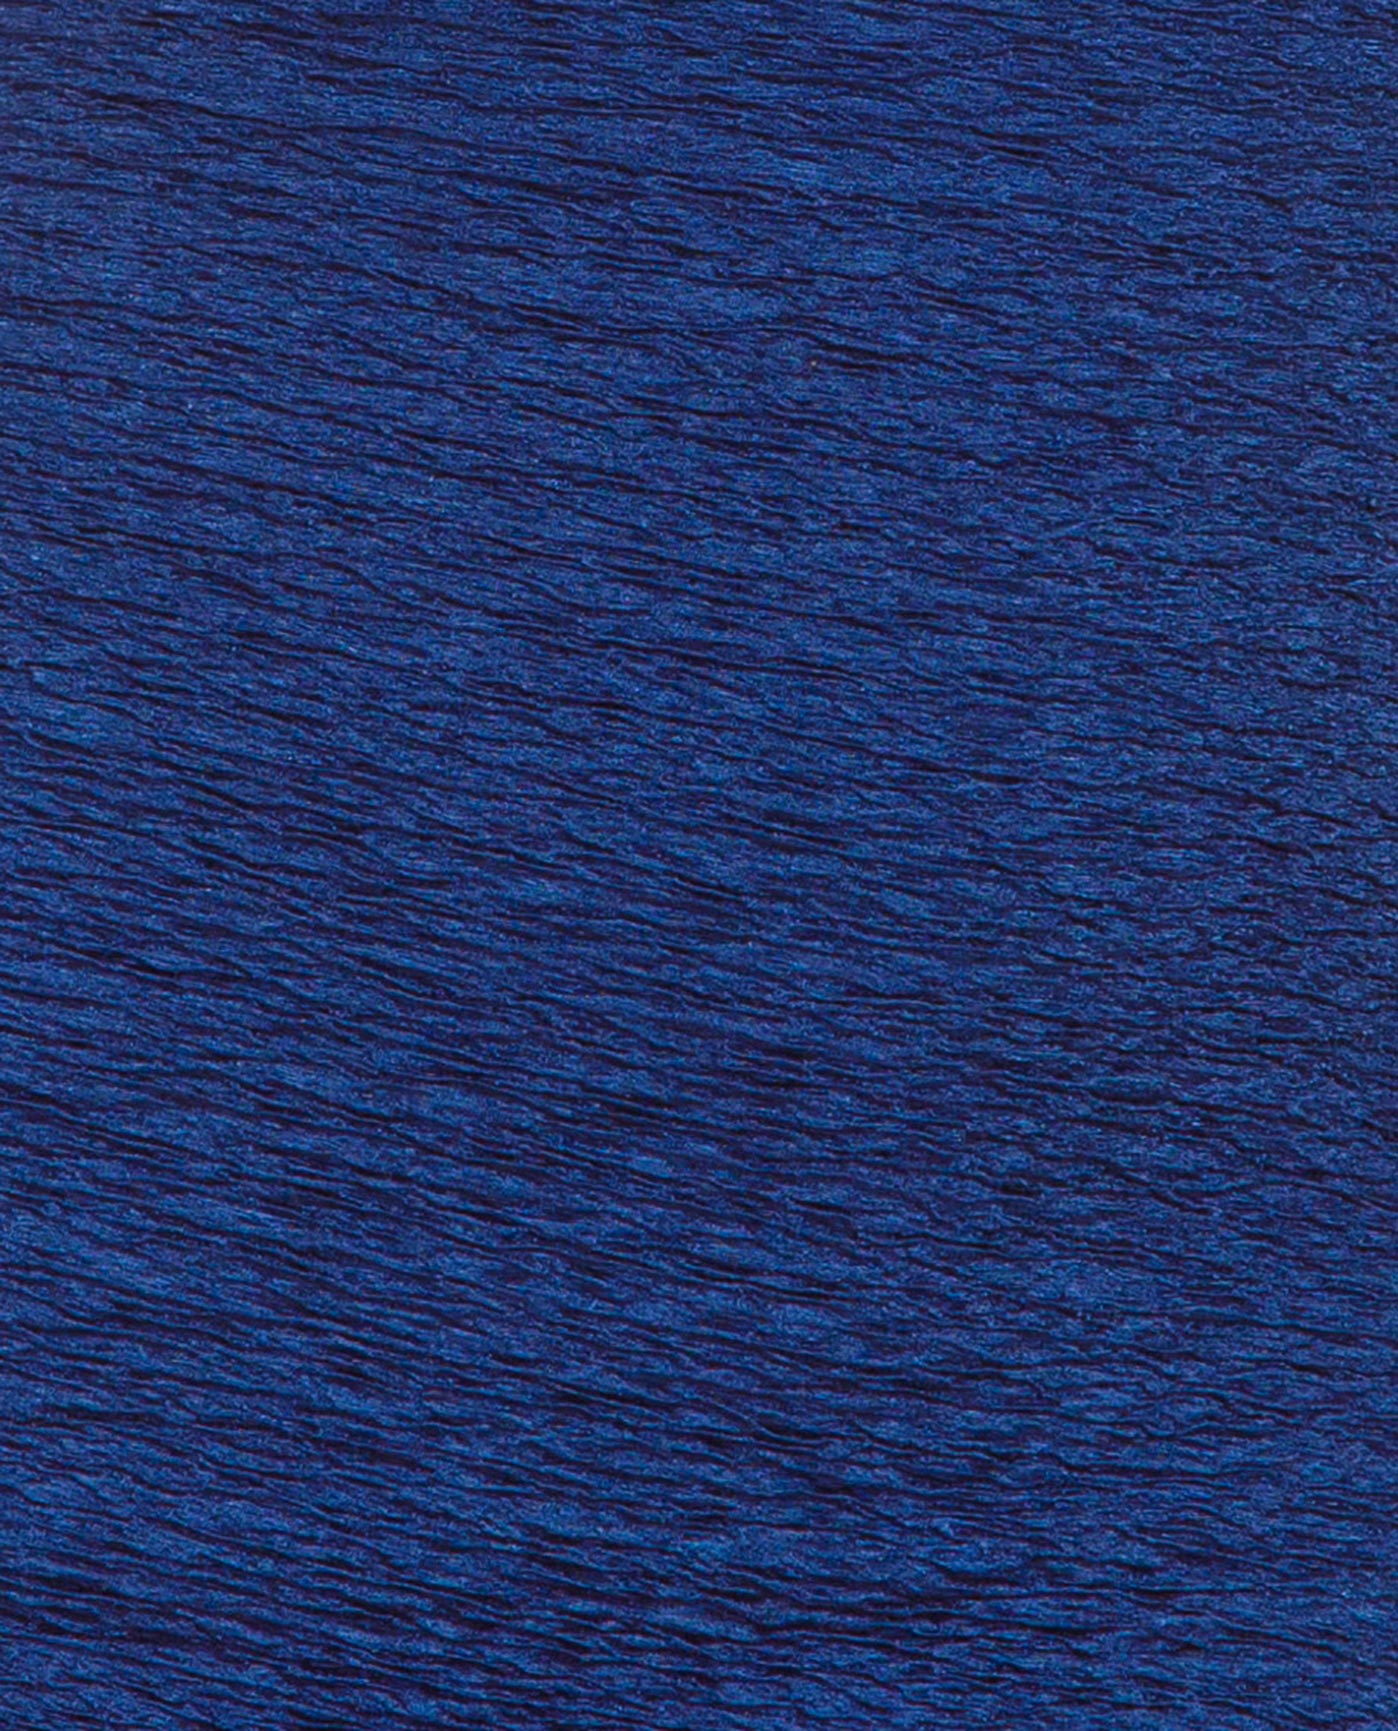 FABRIC SWATCH VIEW OF CHLORINE RESISTANT KRINKLE TEXTURED SOLID X-BACK ONE PIECE | KRINKLE NAVY